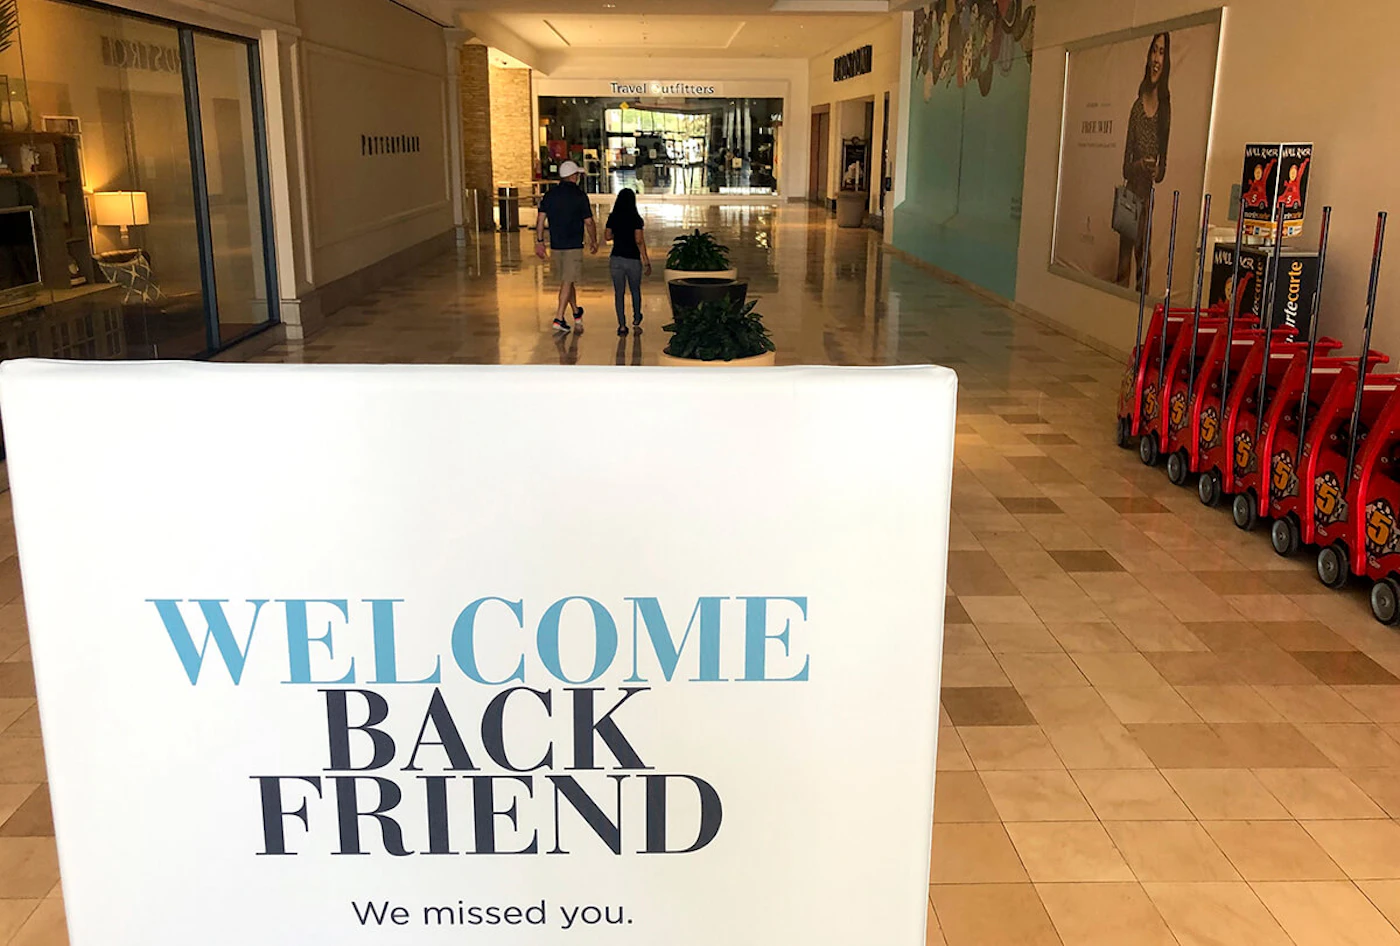 sign saying "welcome back friend" in Chandler mall